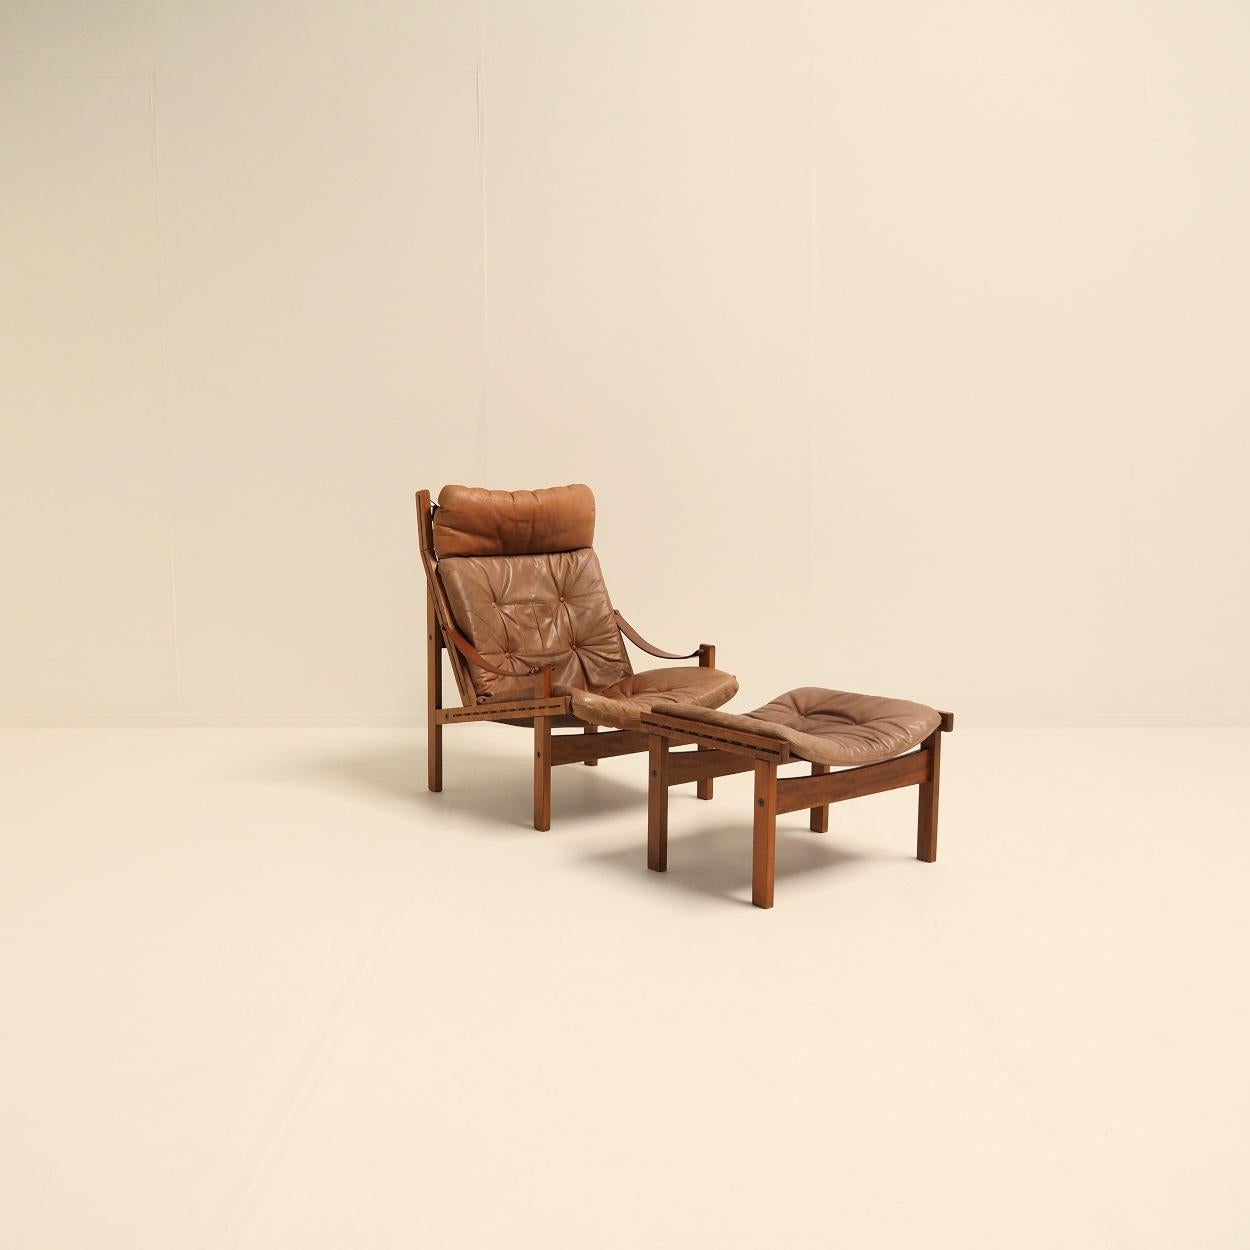 ‘Hunter Lounge Chair’ with Original Ottoman by Torbjørn Afdal, Norway 1962 For Sale 3